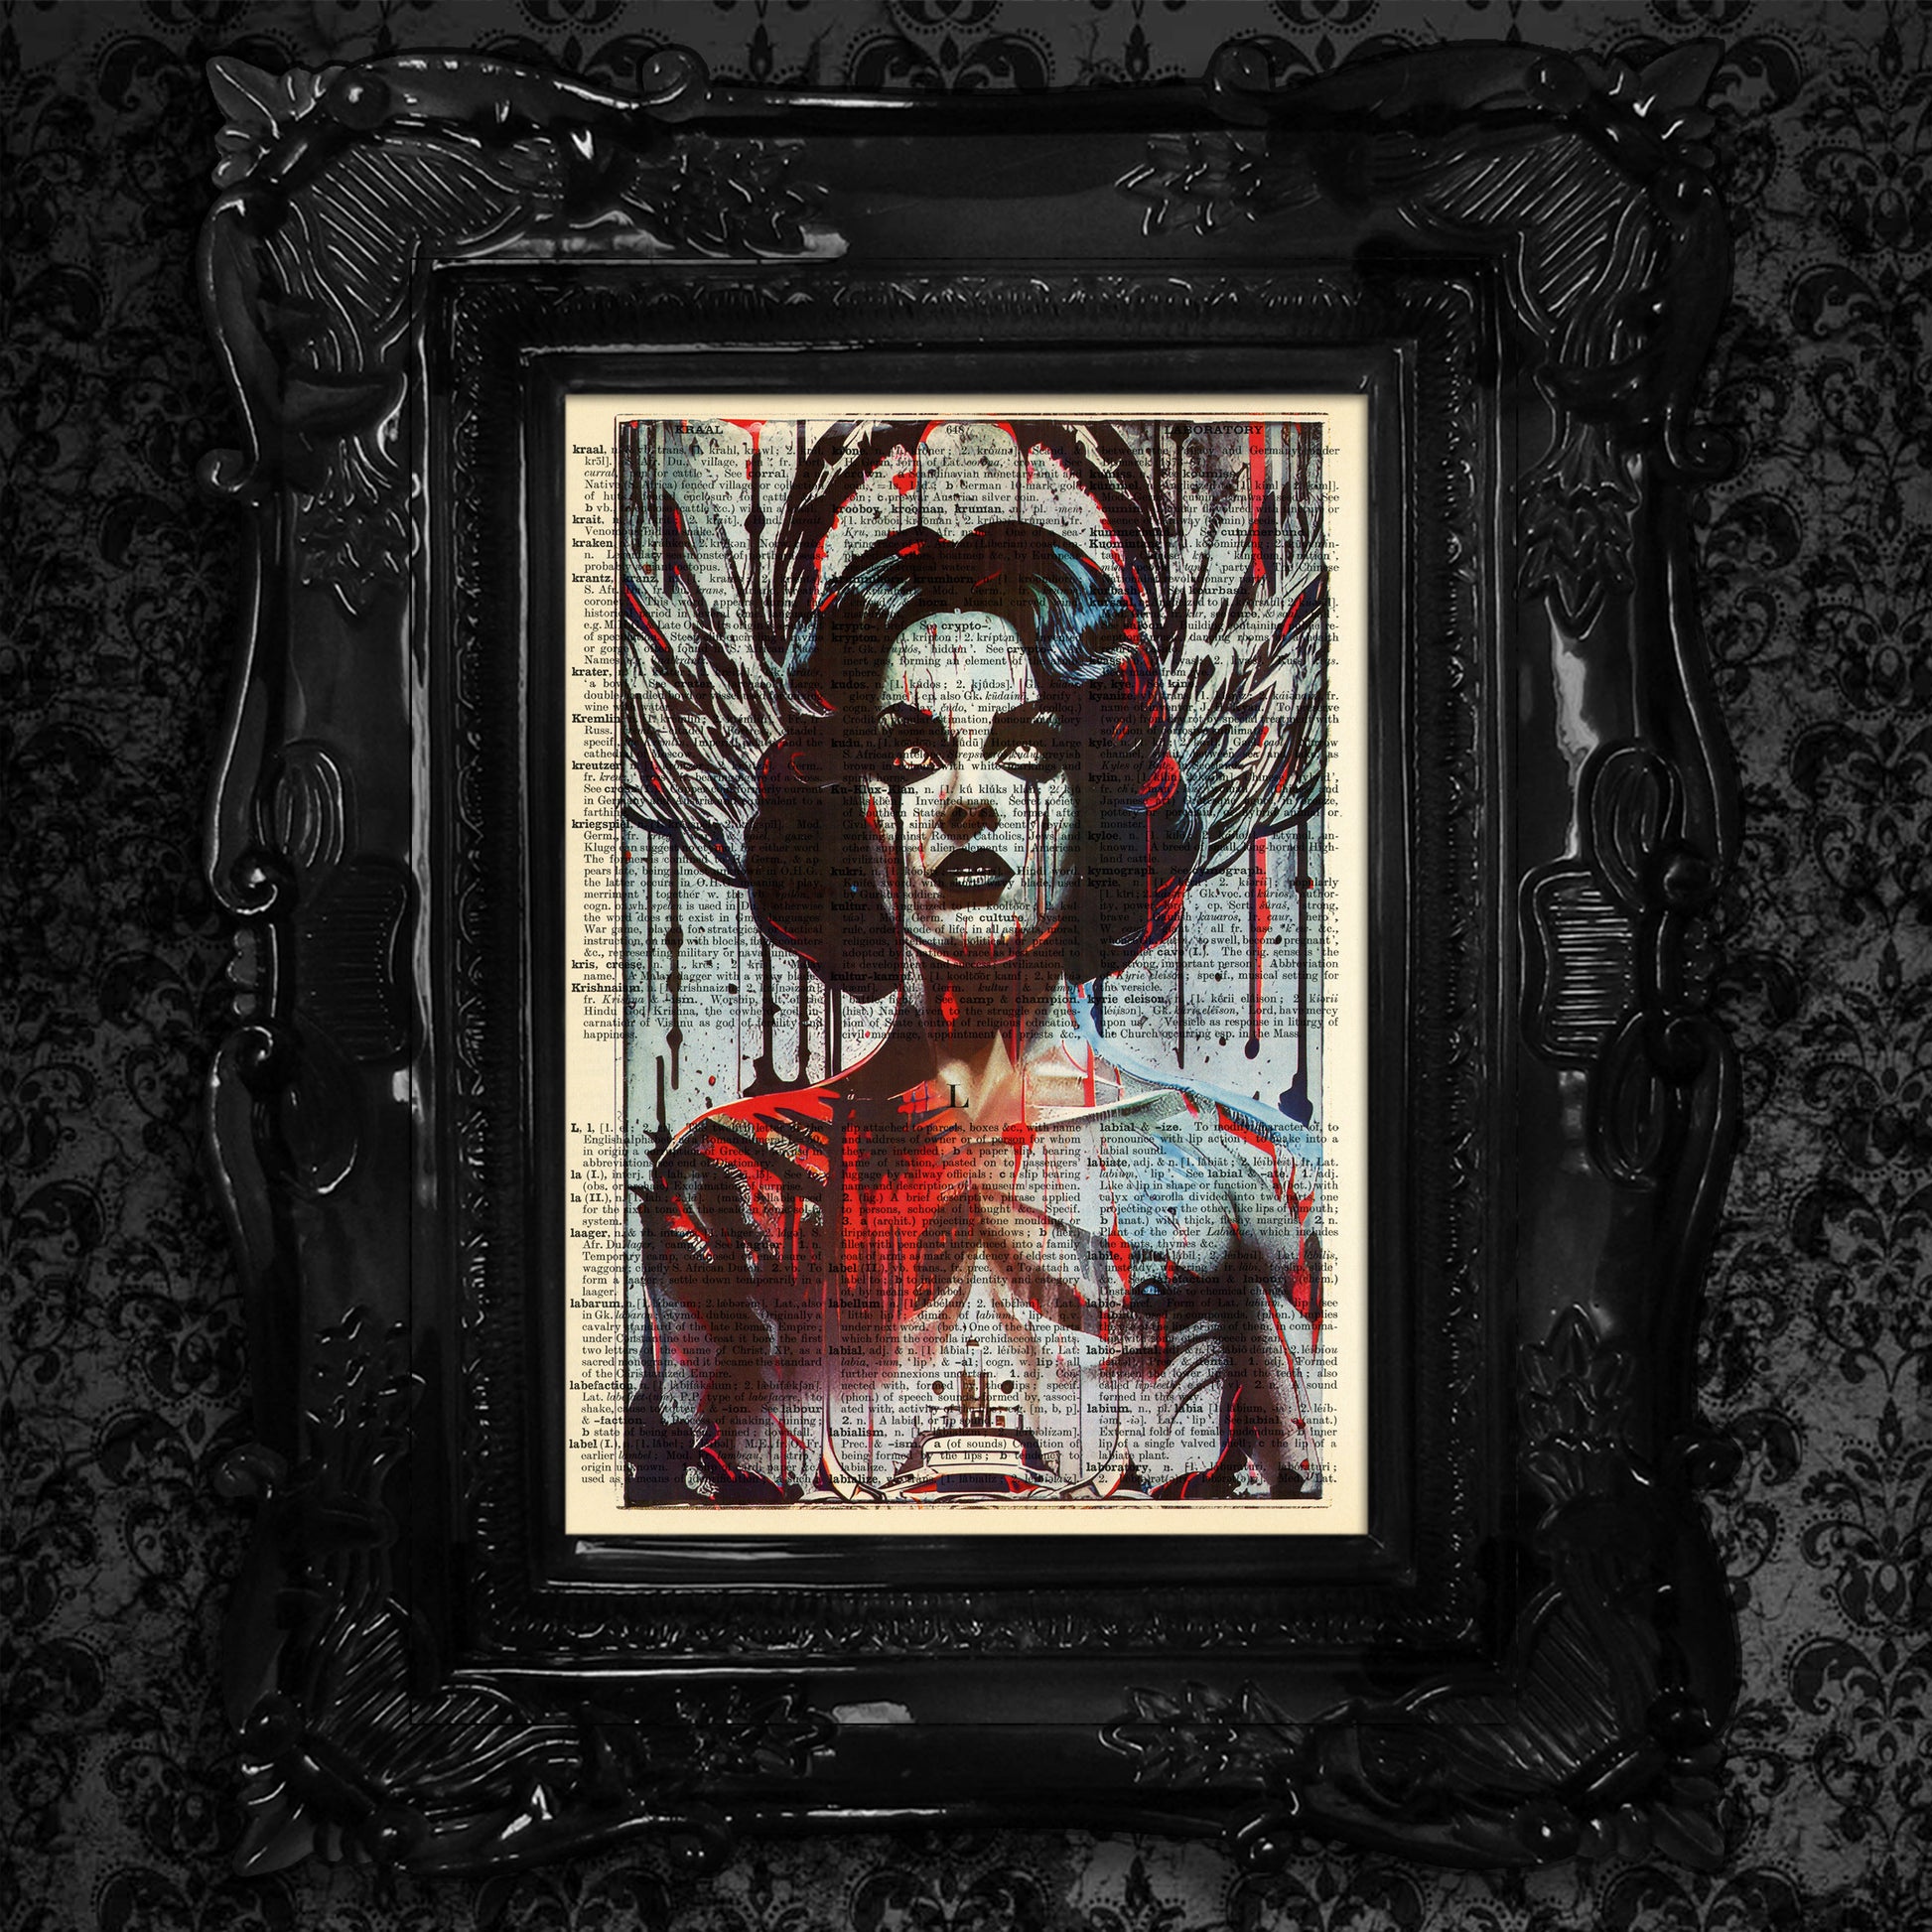 Vintage-style horror artwork with a creepy portrait on a dictionary page.